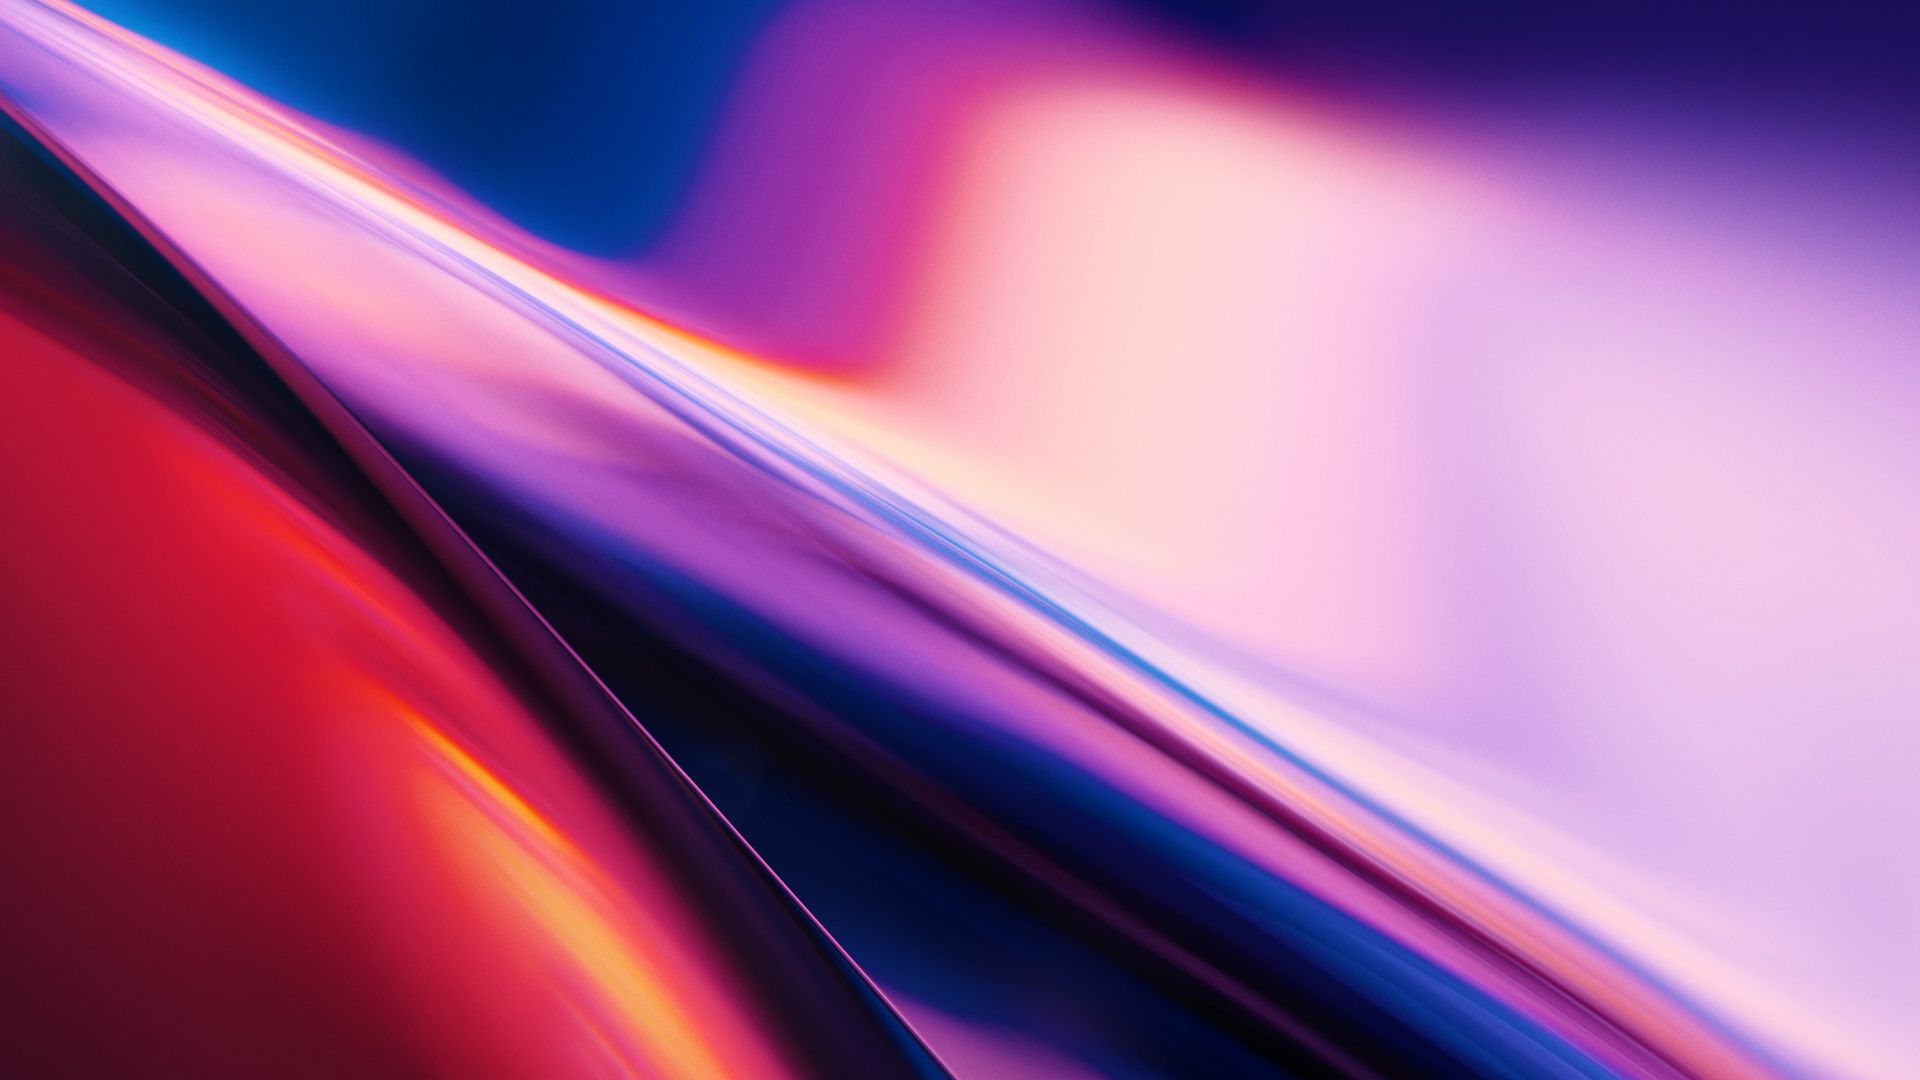 Wallpaper OnePlus 7, abstract, colorful, 4K, OS #22319